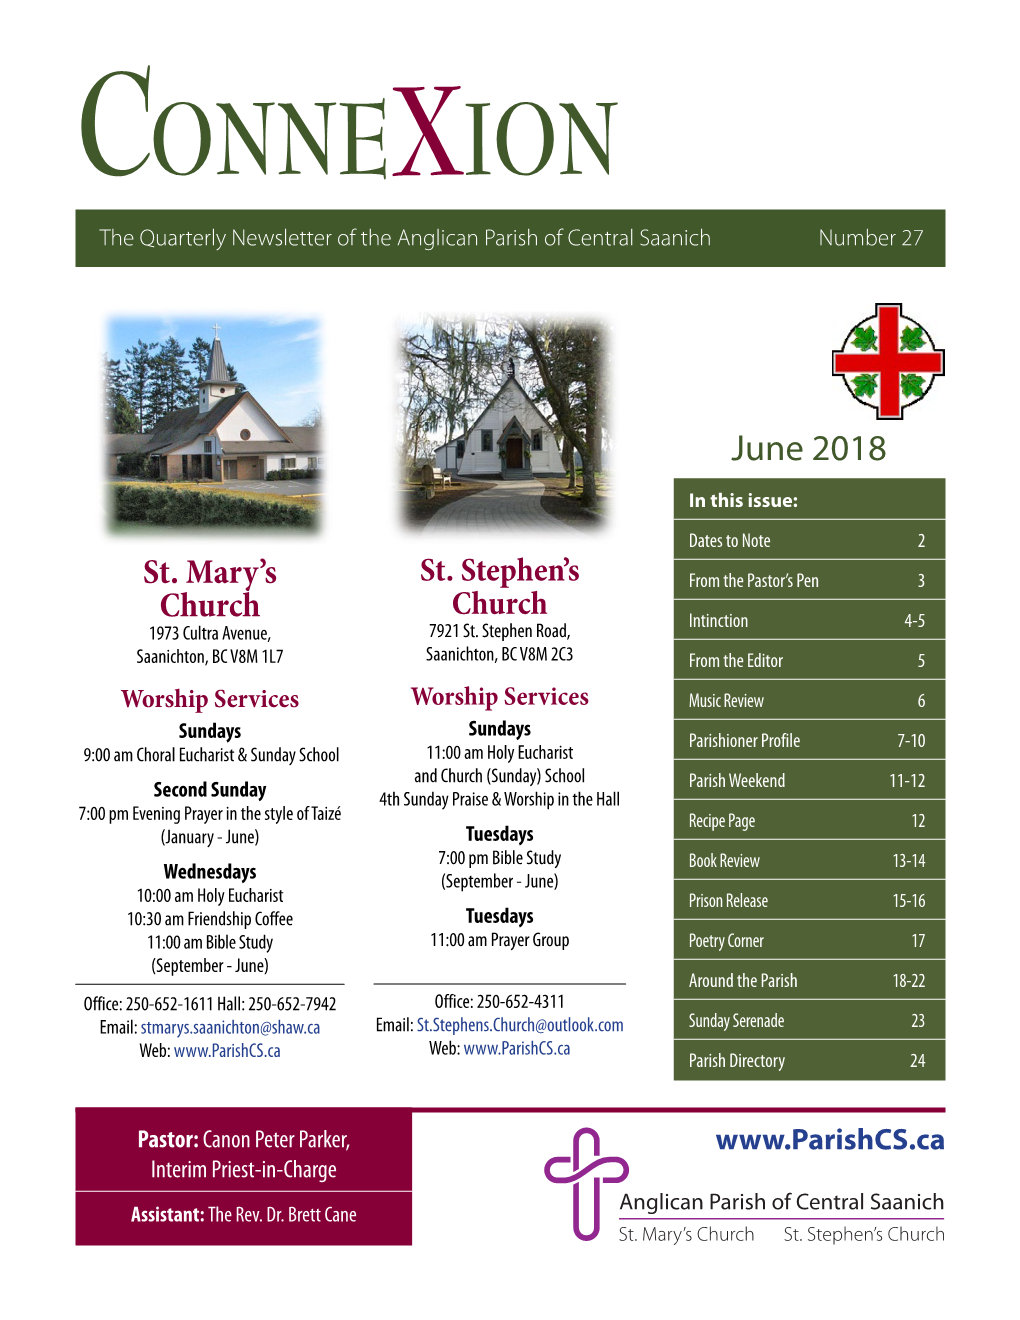 Connexion the Quarterly Newsletter of the Anglican Parish of Central Saanich Number 27